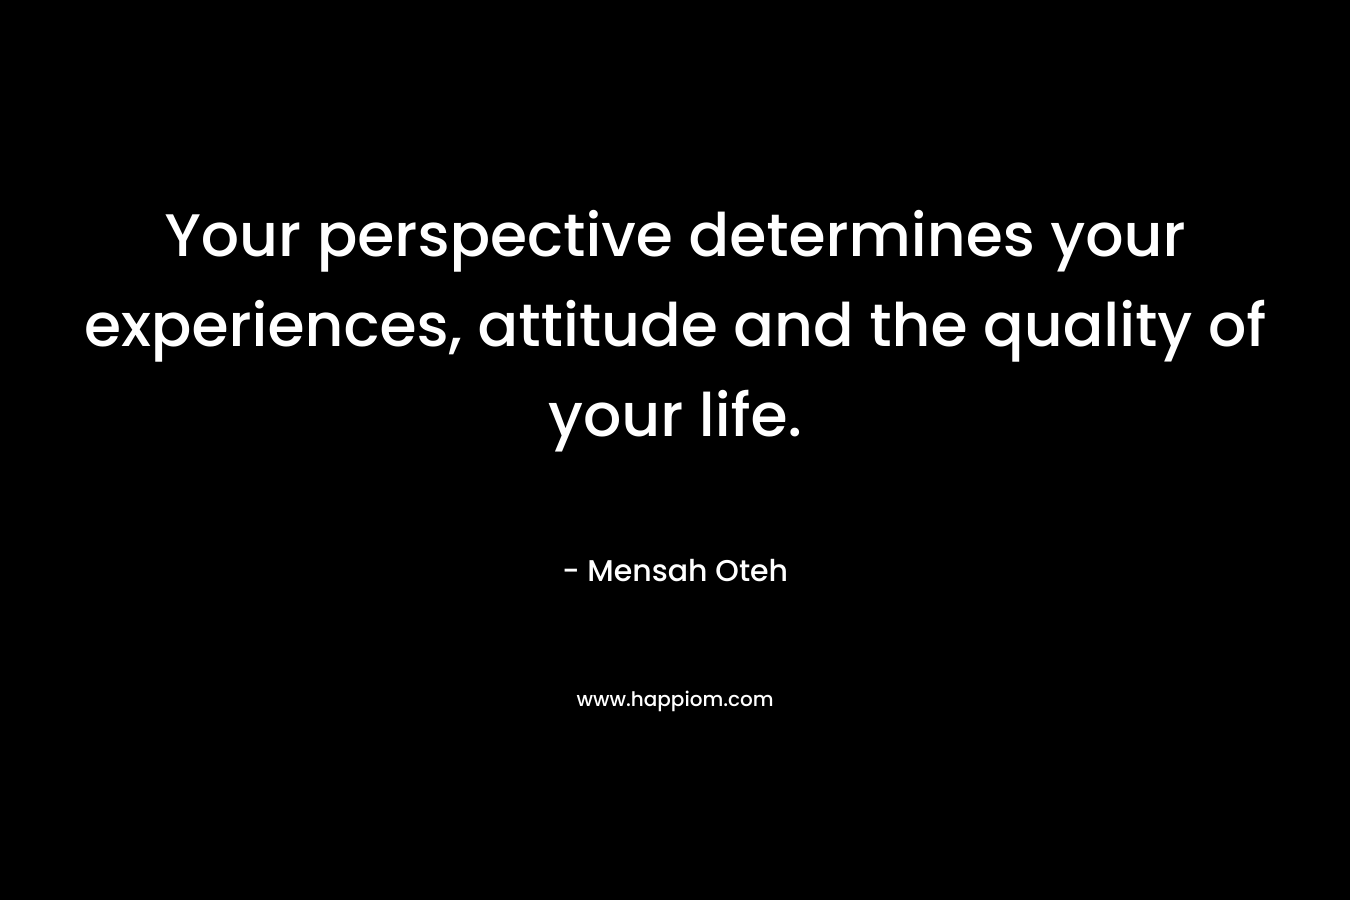 Your perspective determines your experiences, attitude and the quality of your life.